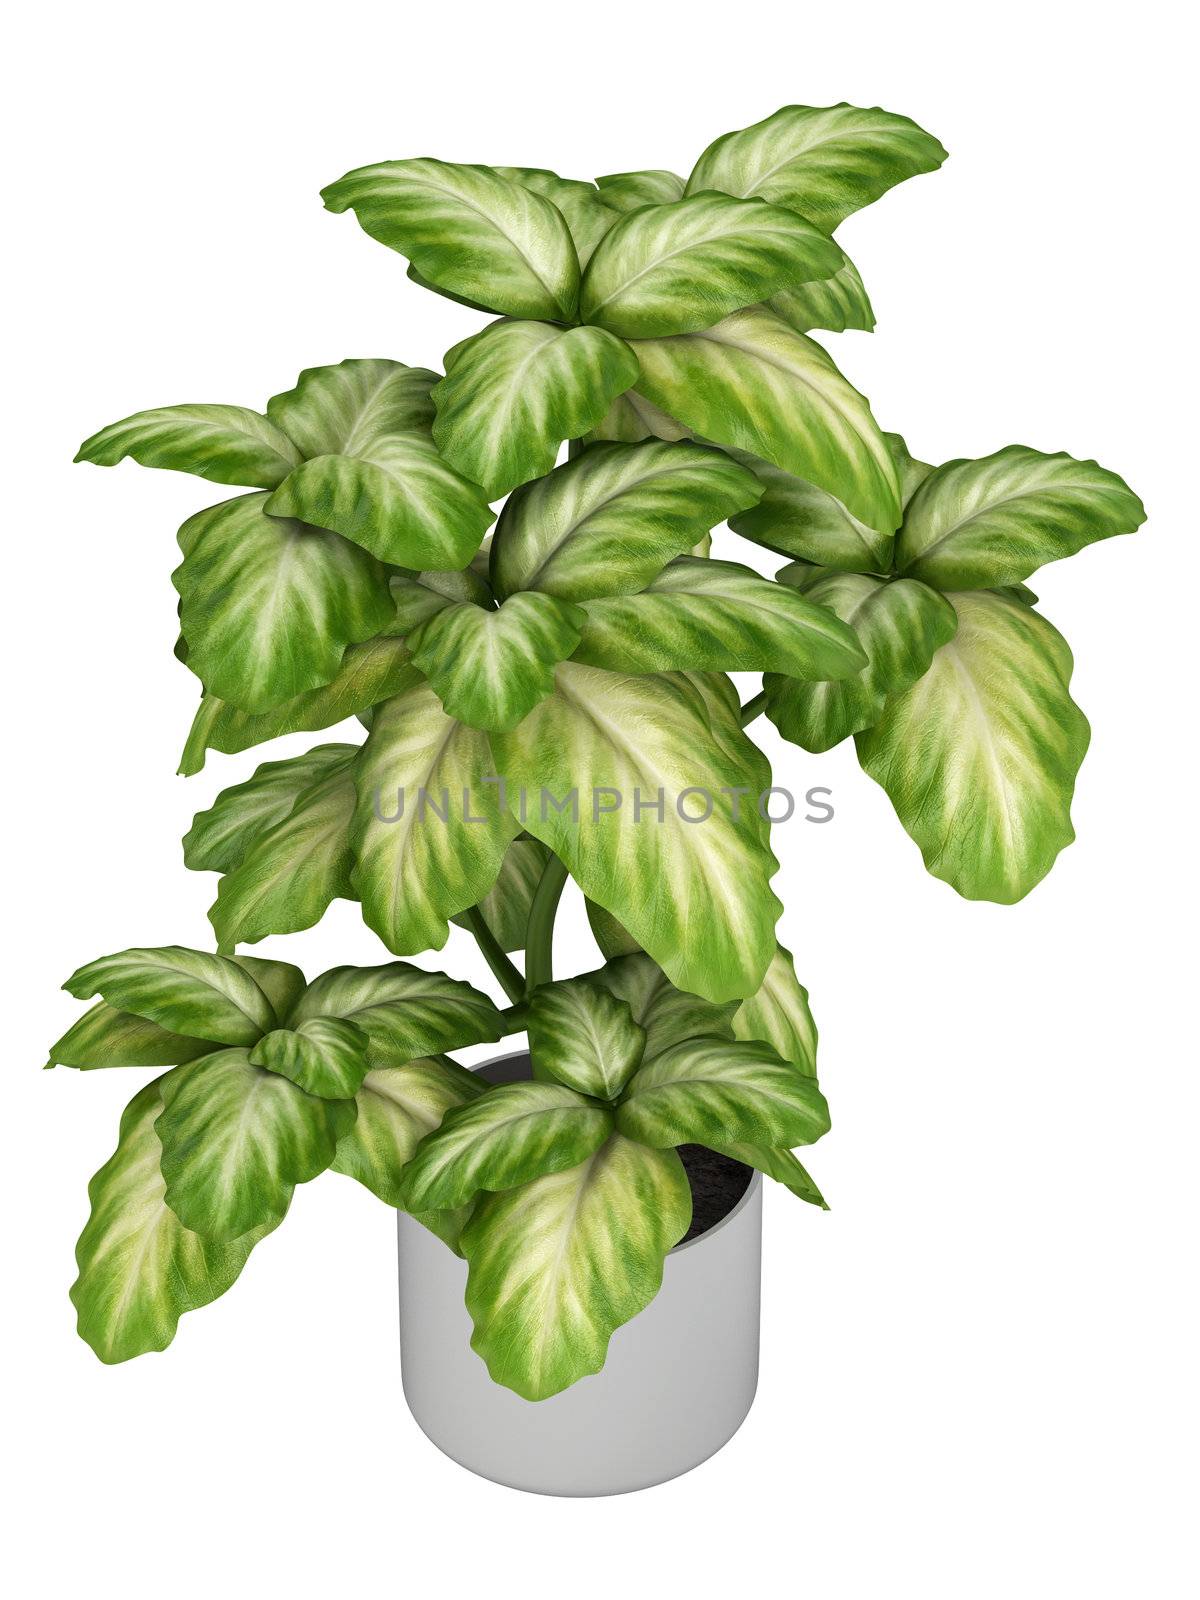 Fresh branchy home plant in a pot isolated on white background